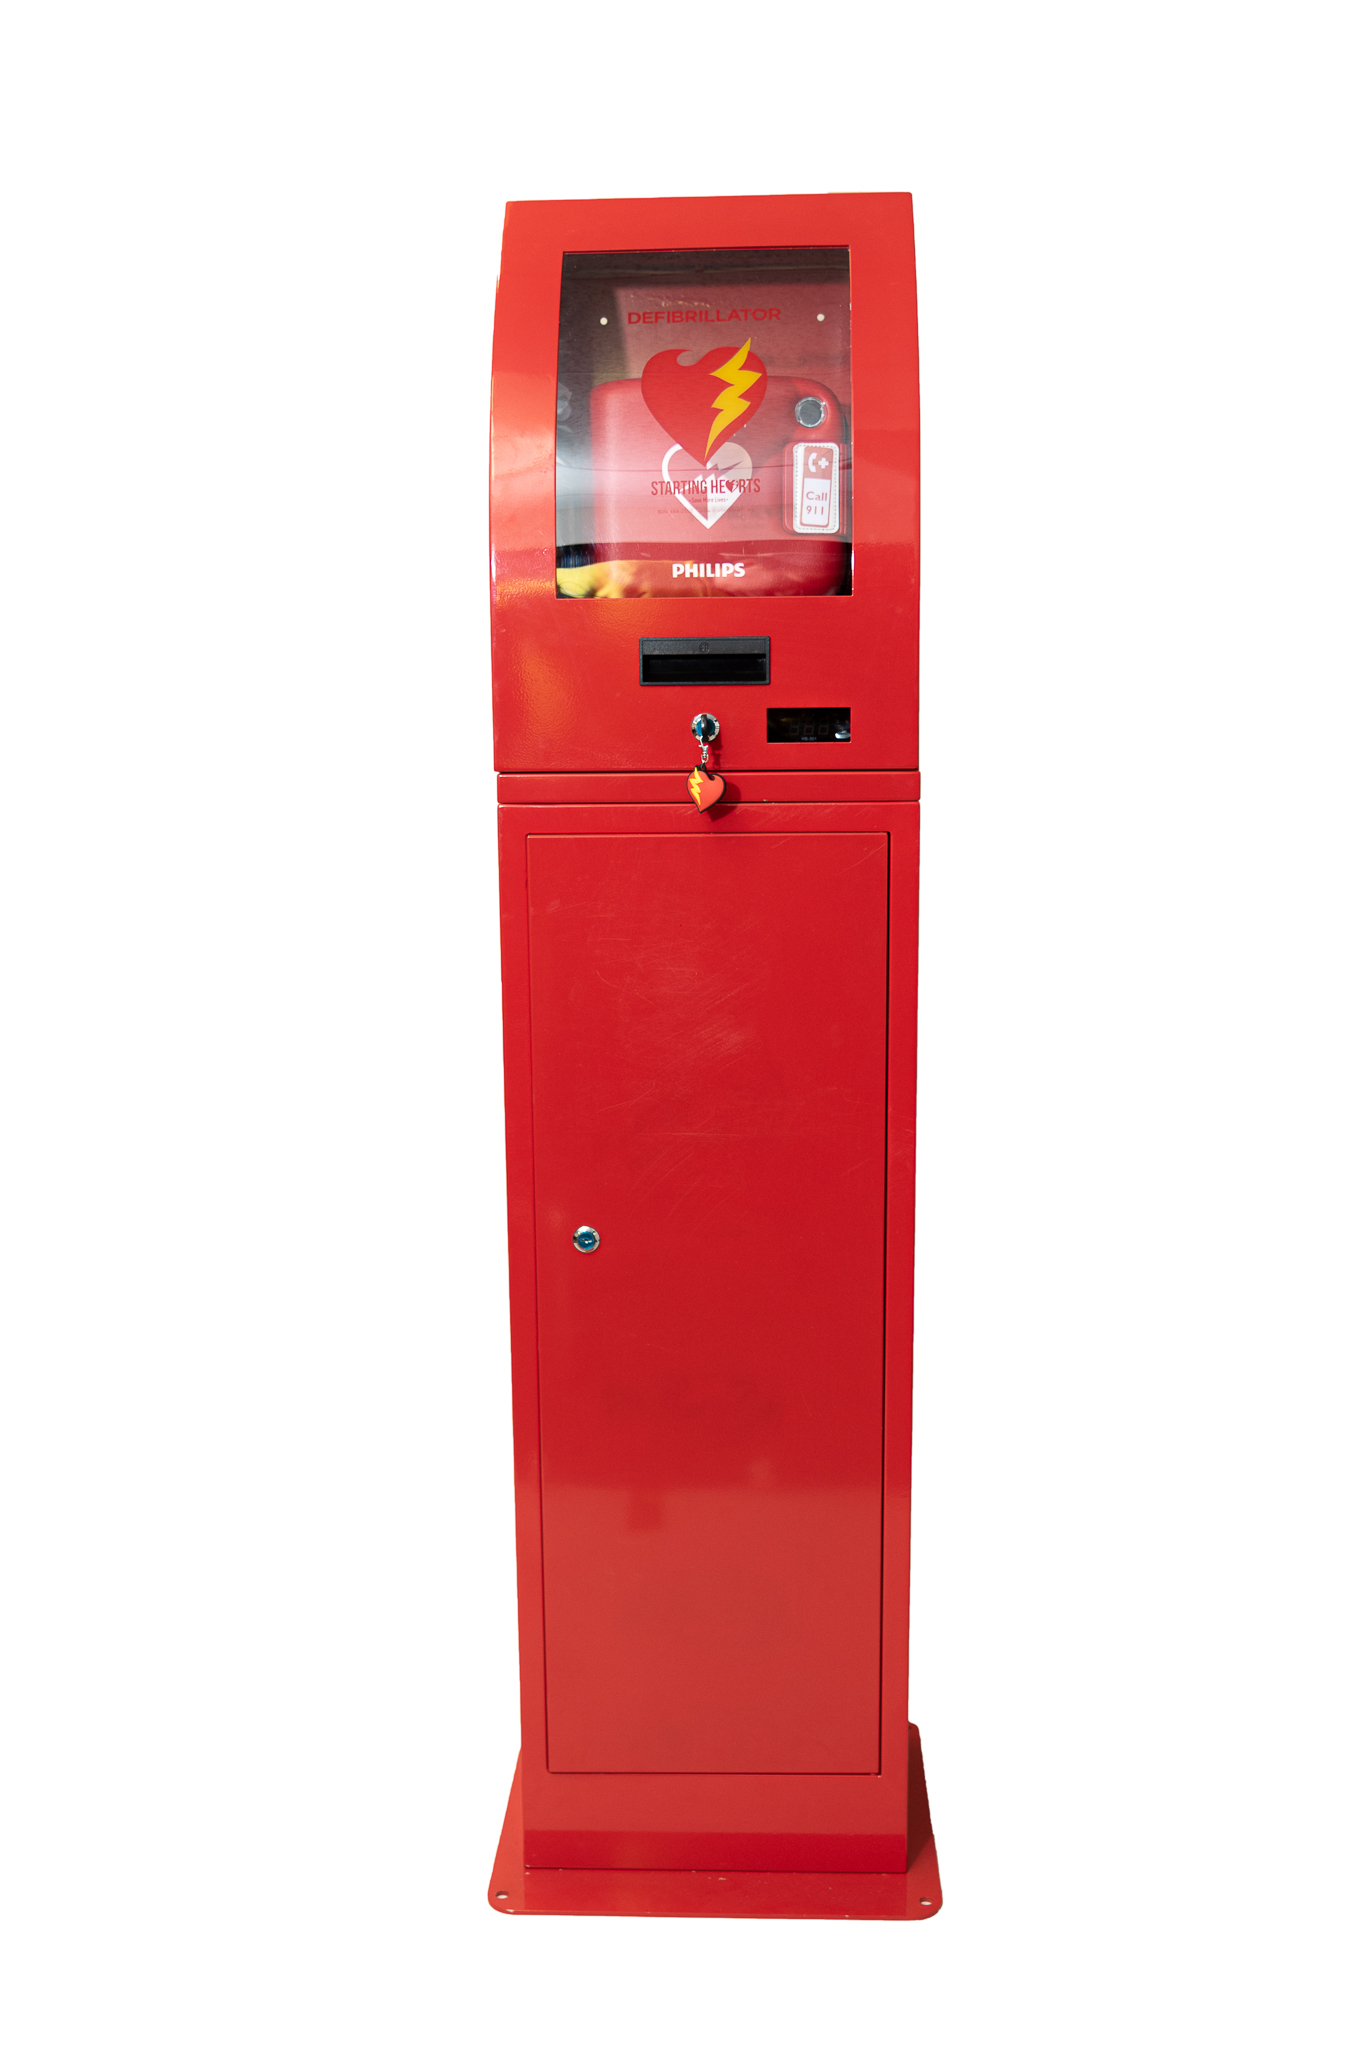 Exterior Heated AED Tower